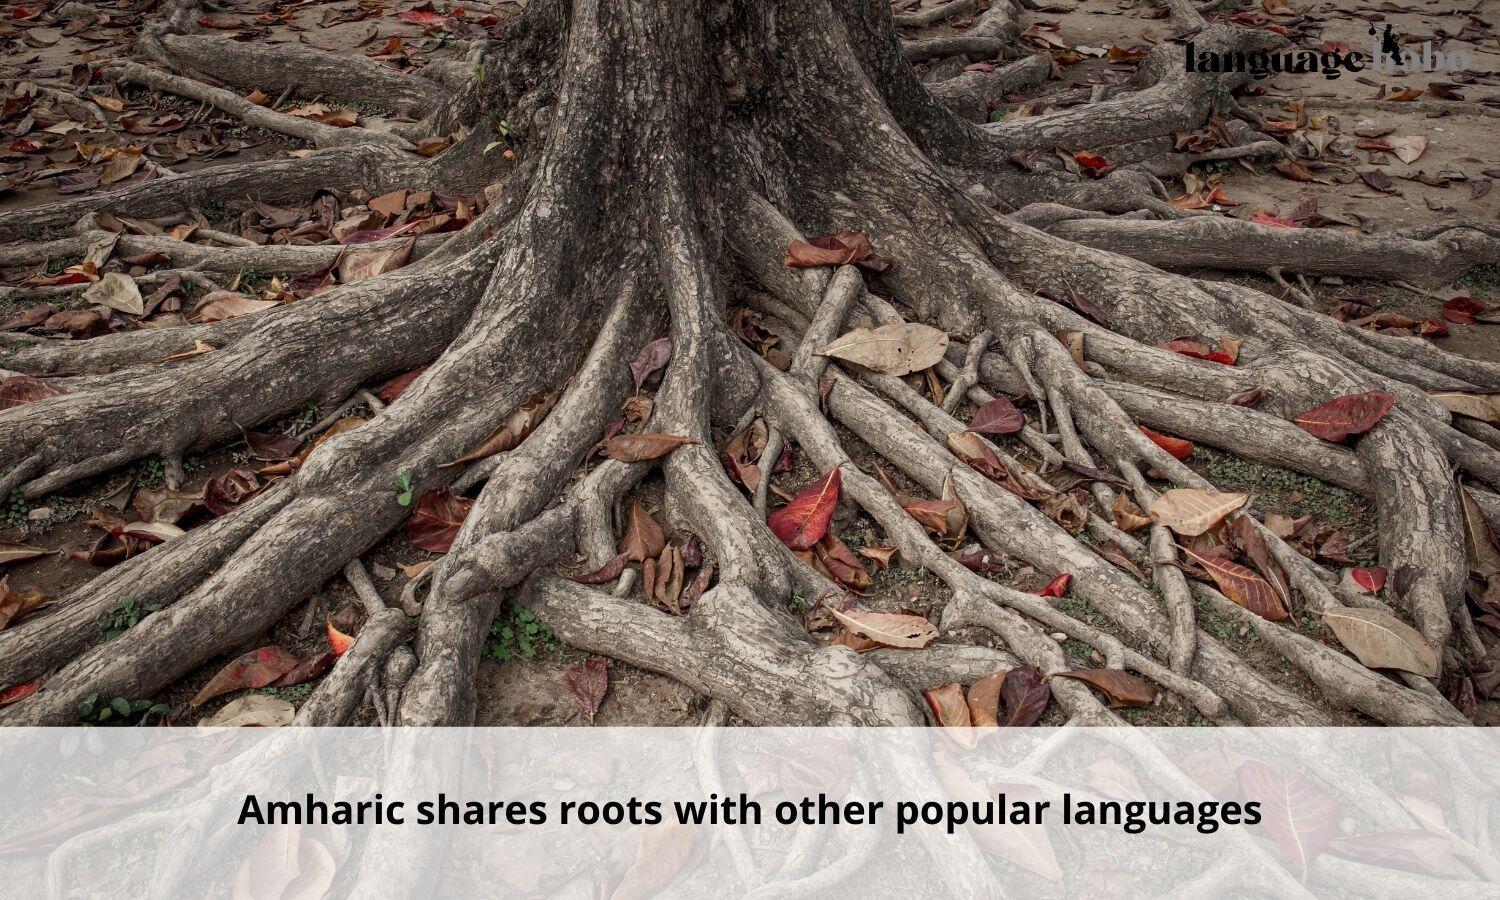 Amharic shares roots with other languages